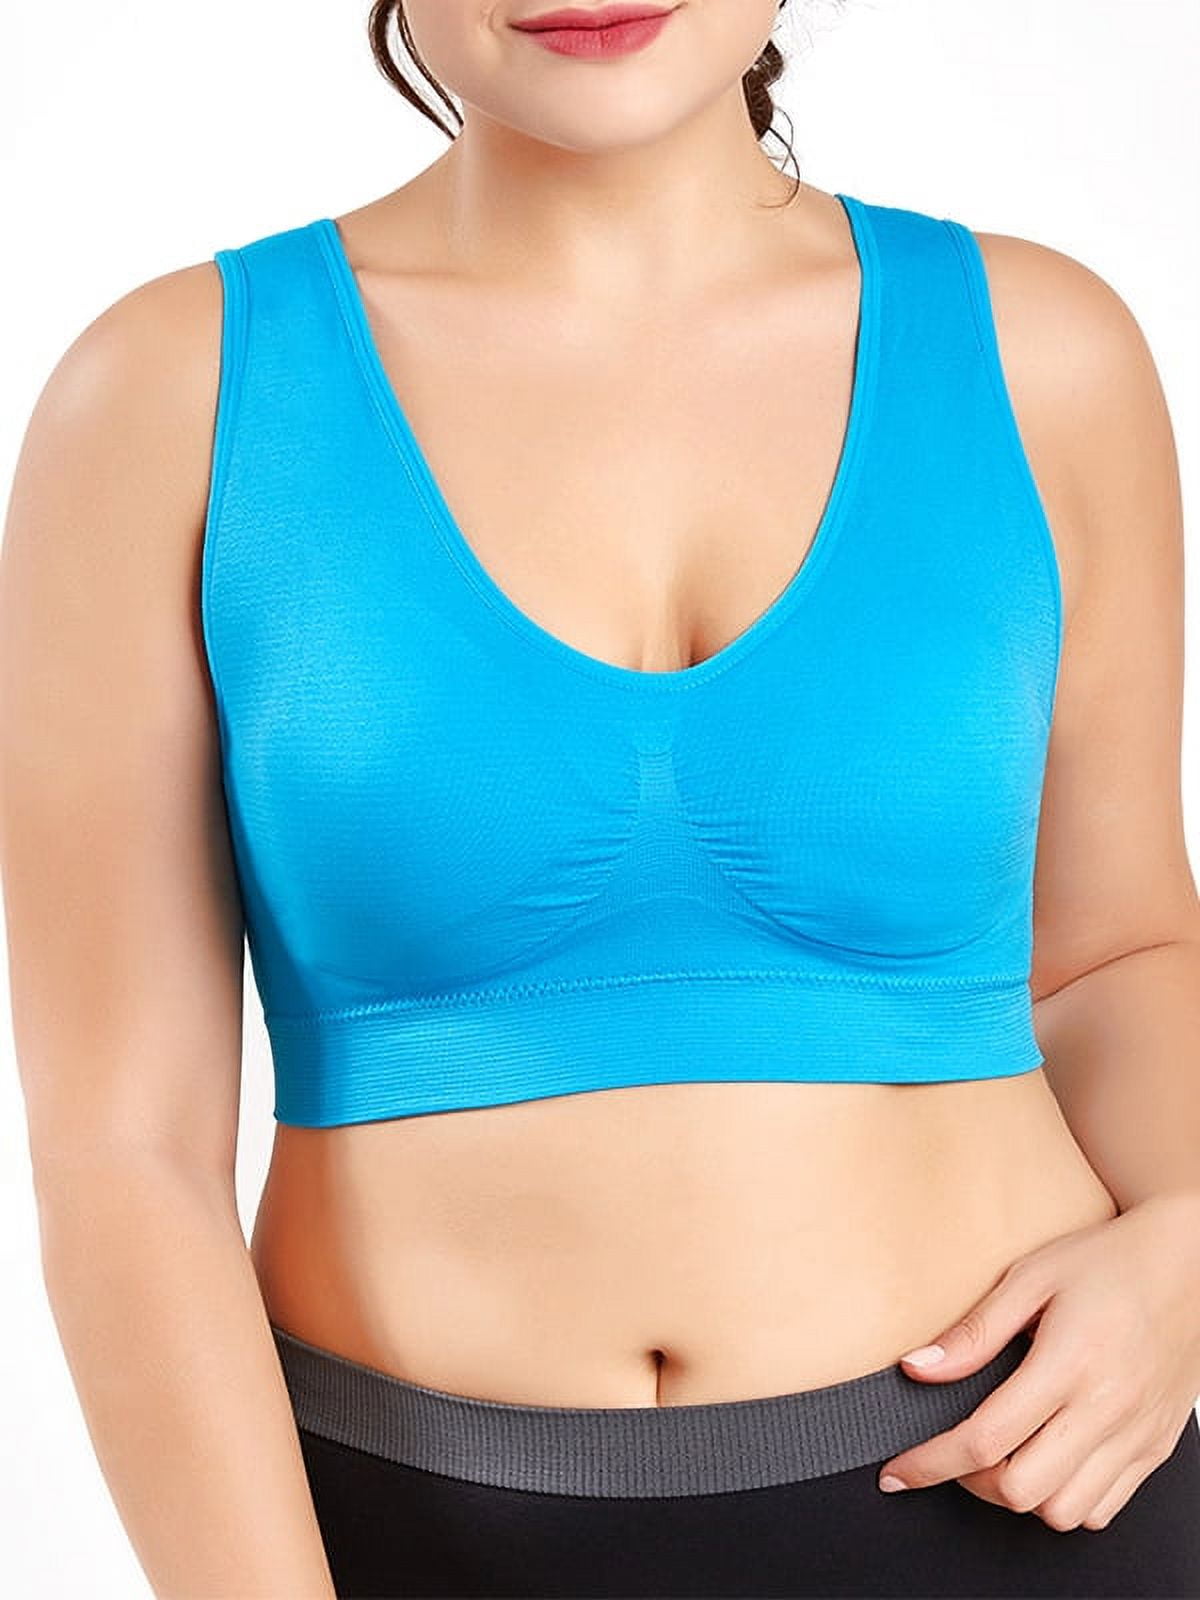 Women's Zip Front Sports Bras - High Impact Support Full Figure Running  Wirefree Workout Top - Sports Bras for Women Plus Size Workout Fitness  Running Underwear S-5XL (Color : Blue, Size 